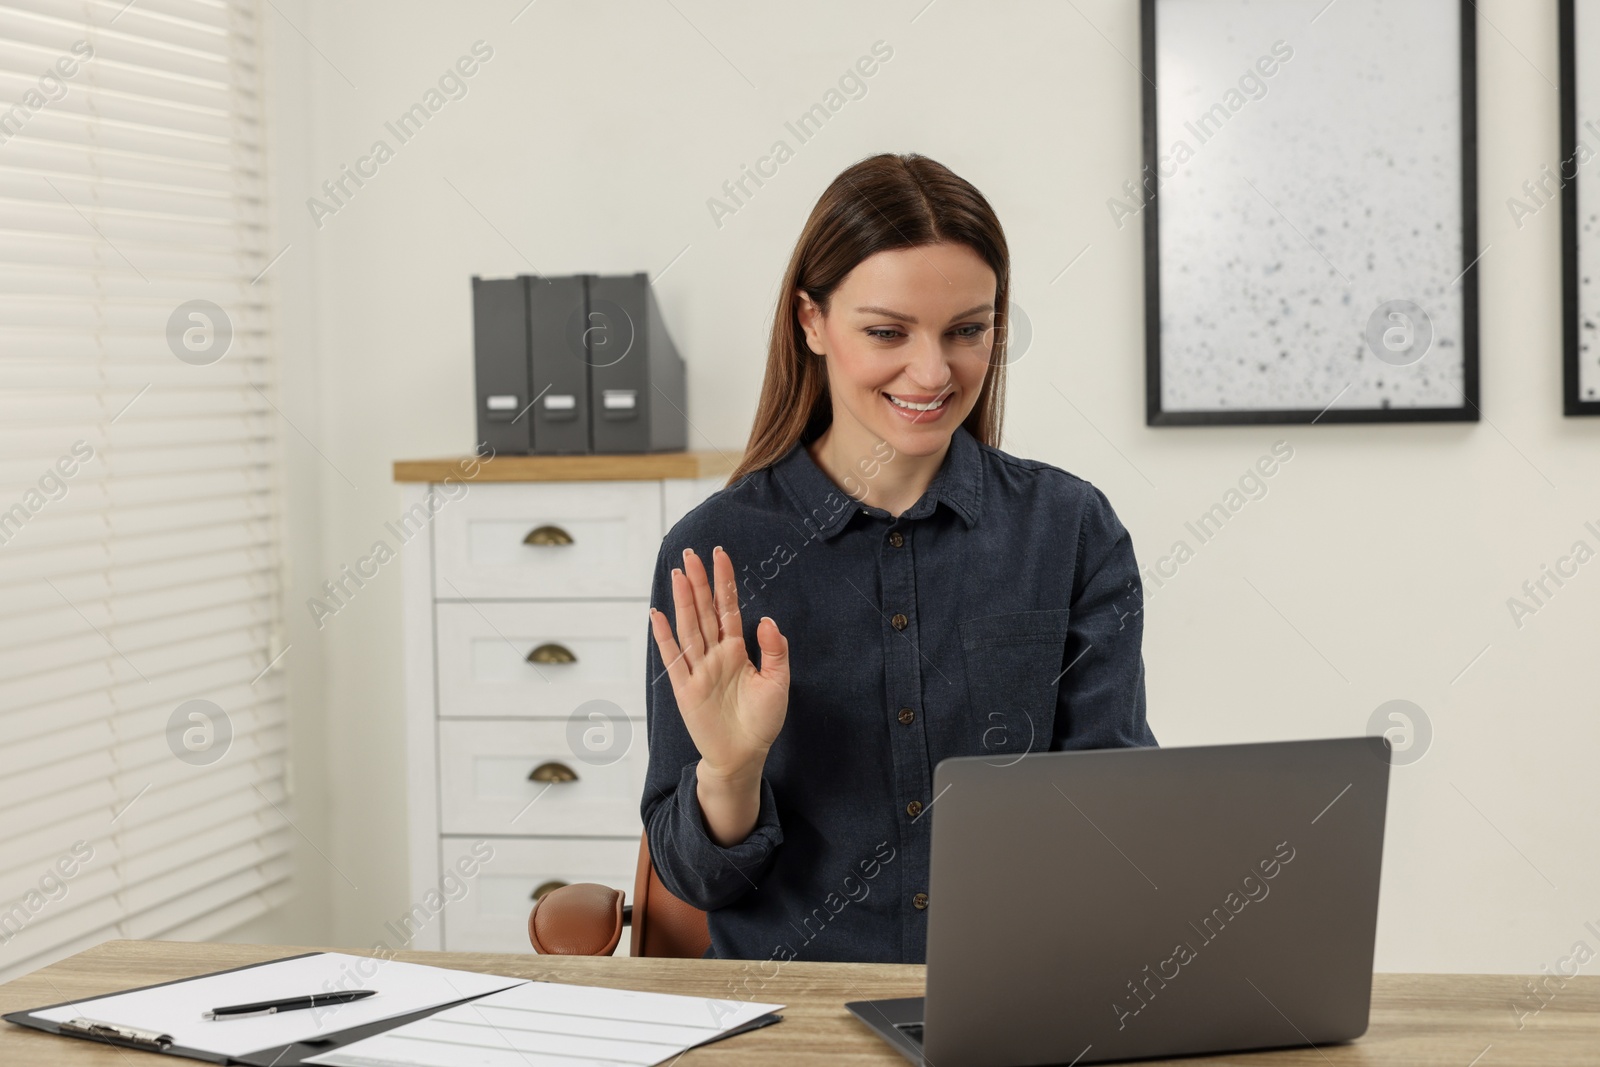 Photo of Woman waving hello during video chat via laptop at wooden table in office